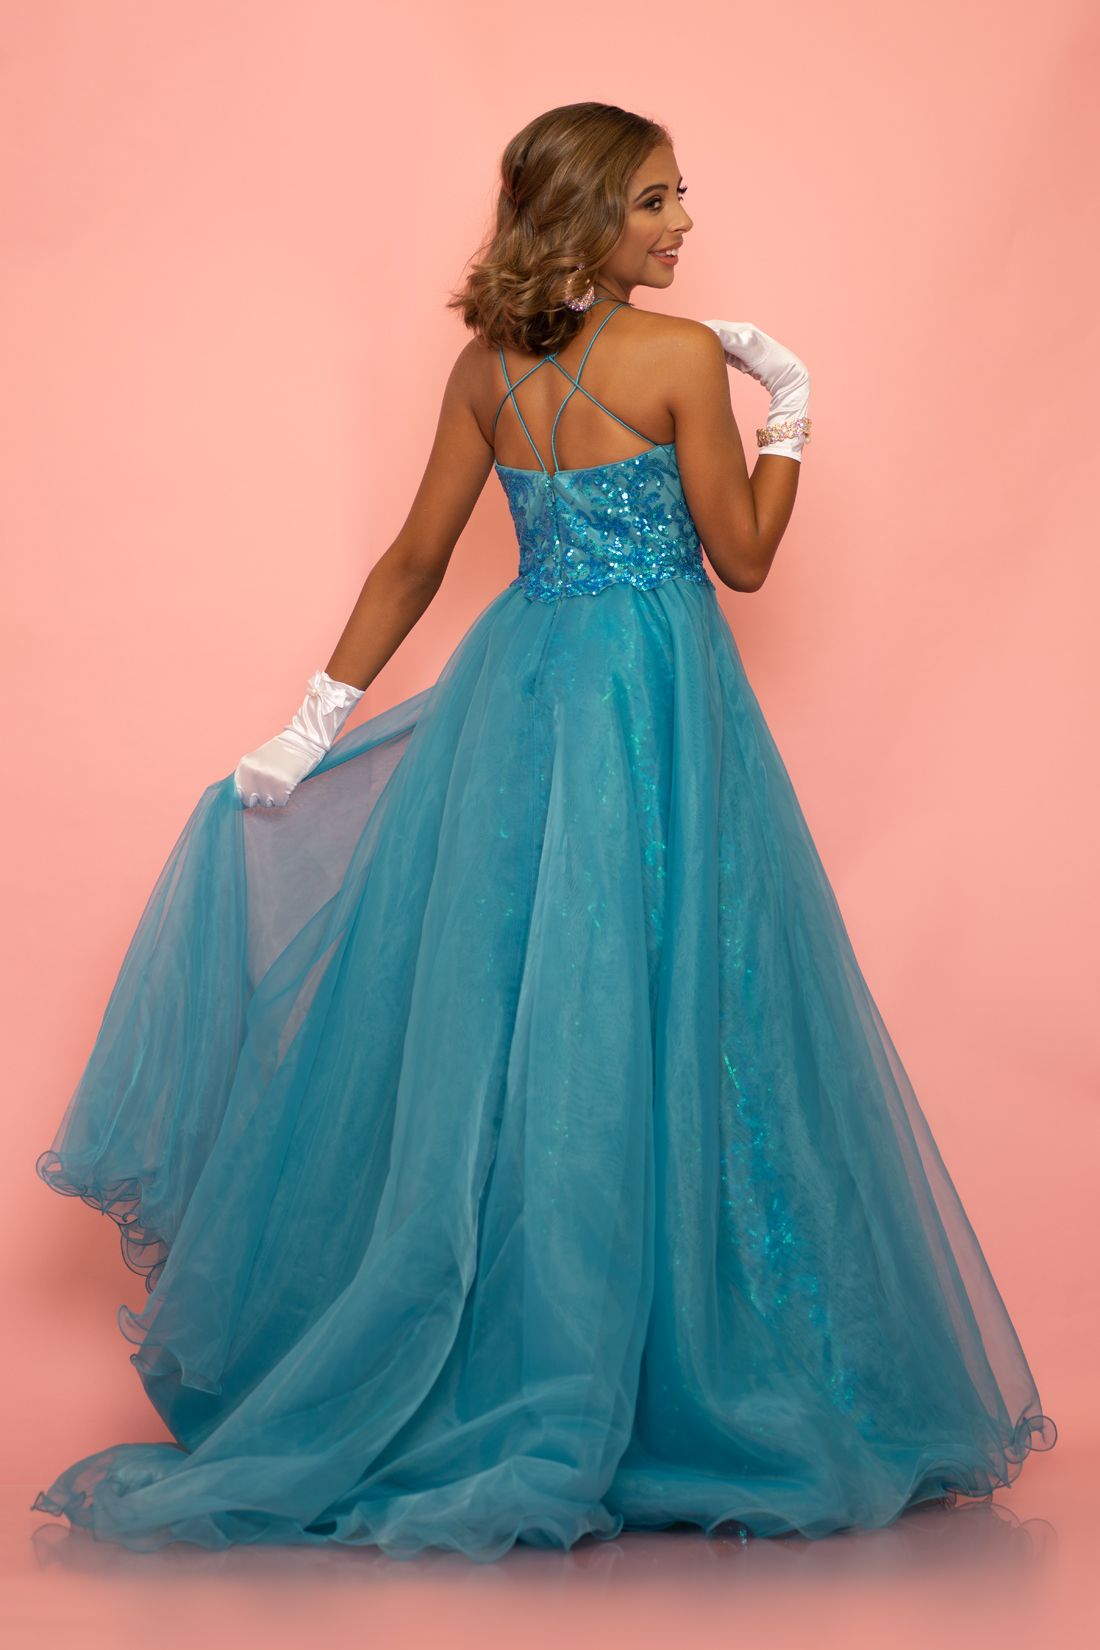 Sugar Kayne C112  by Johnathan Kayne is a stunning girls long pageant gown featuring a lush organza overskirt. This high modest halter neckline is great for kids & preteens! A Line / Fitted Stretch  silhouette is Embellished with a gorgeous sequin scrolling design.   Available Colors: Magenta, Teal  Available Size: 2-16